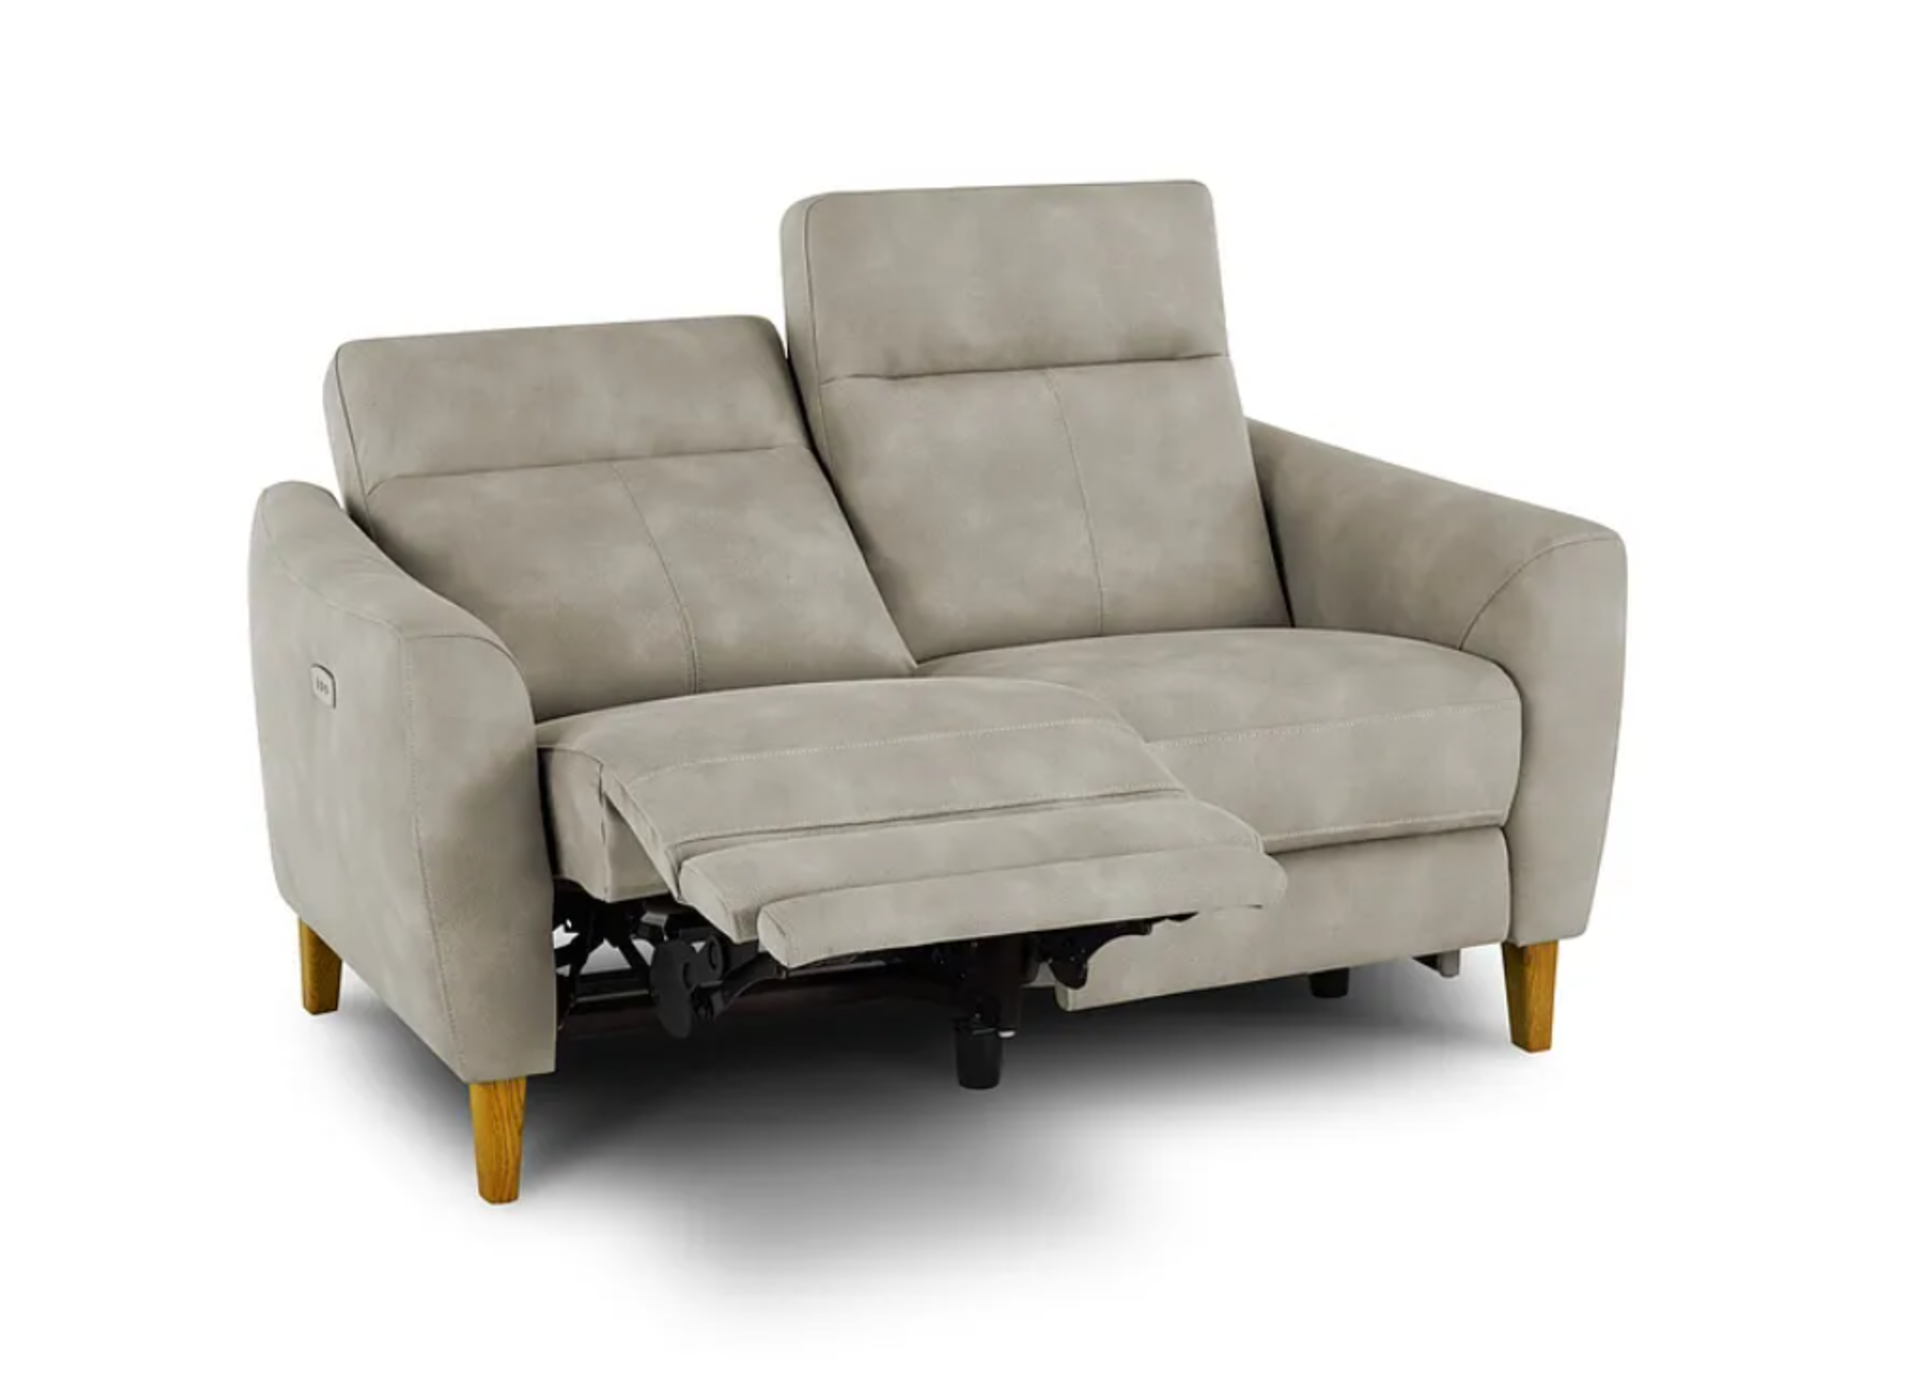 DYLAN 2 Seater Electric Recliner Sofa | Oxford Beige Fabric. RRP £1,329.00. Our Dylan 2-seater - Image 2 of 2